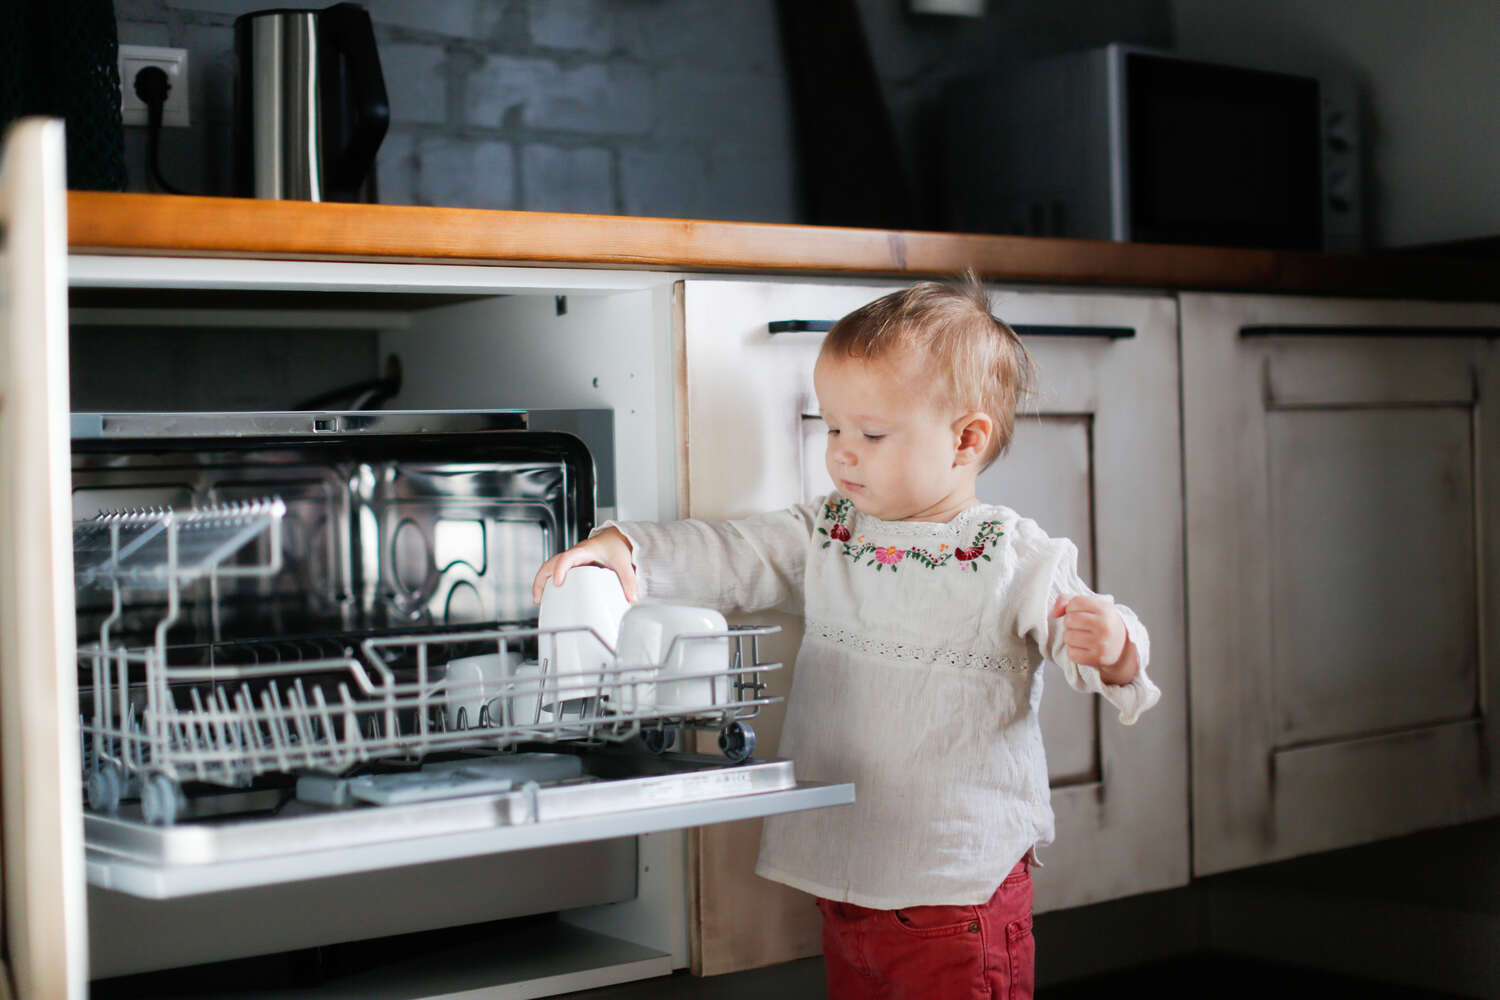 A toddler girl putting glass in dishwasher